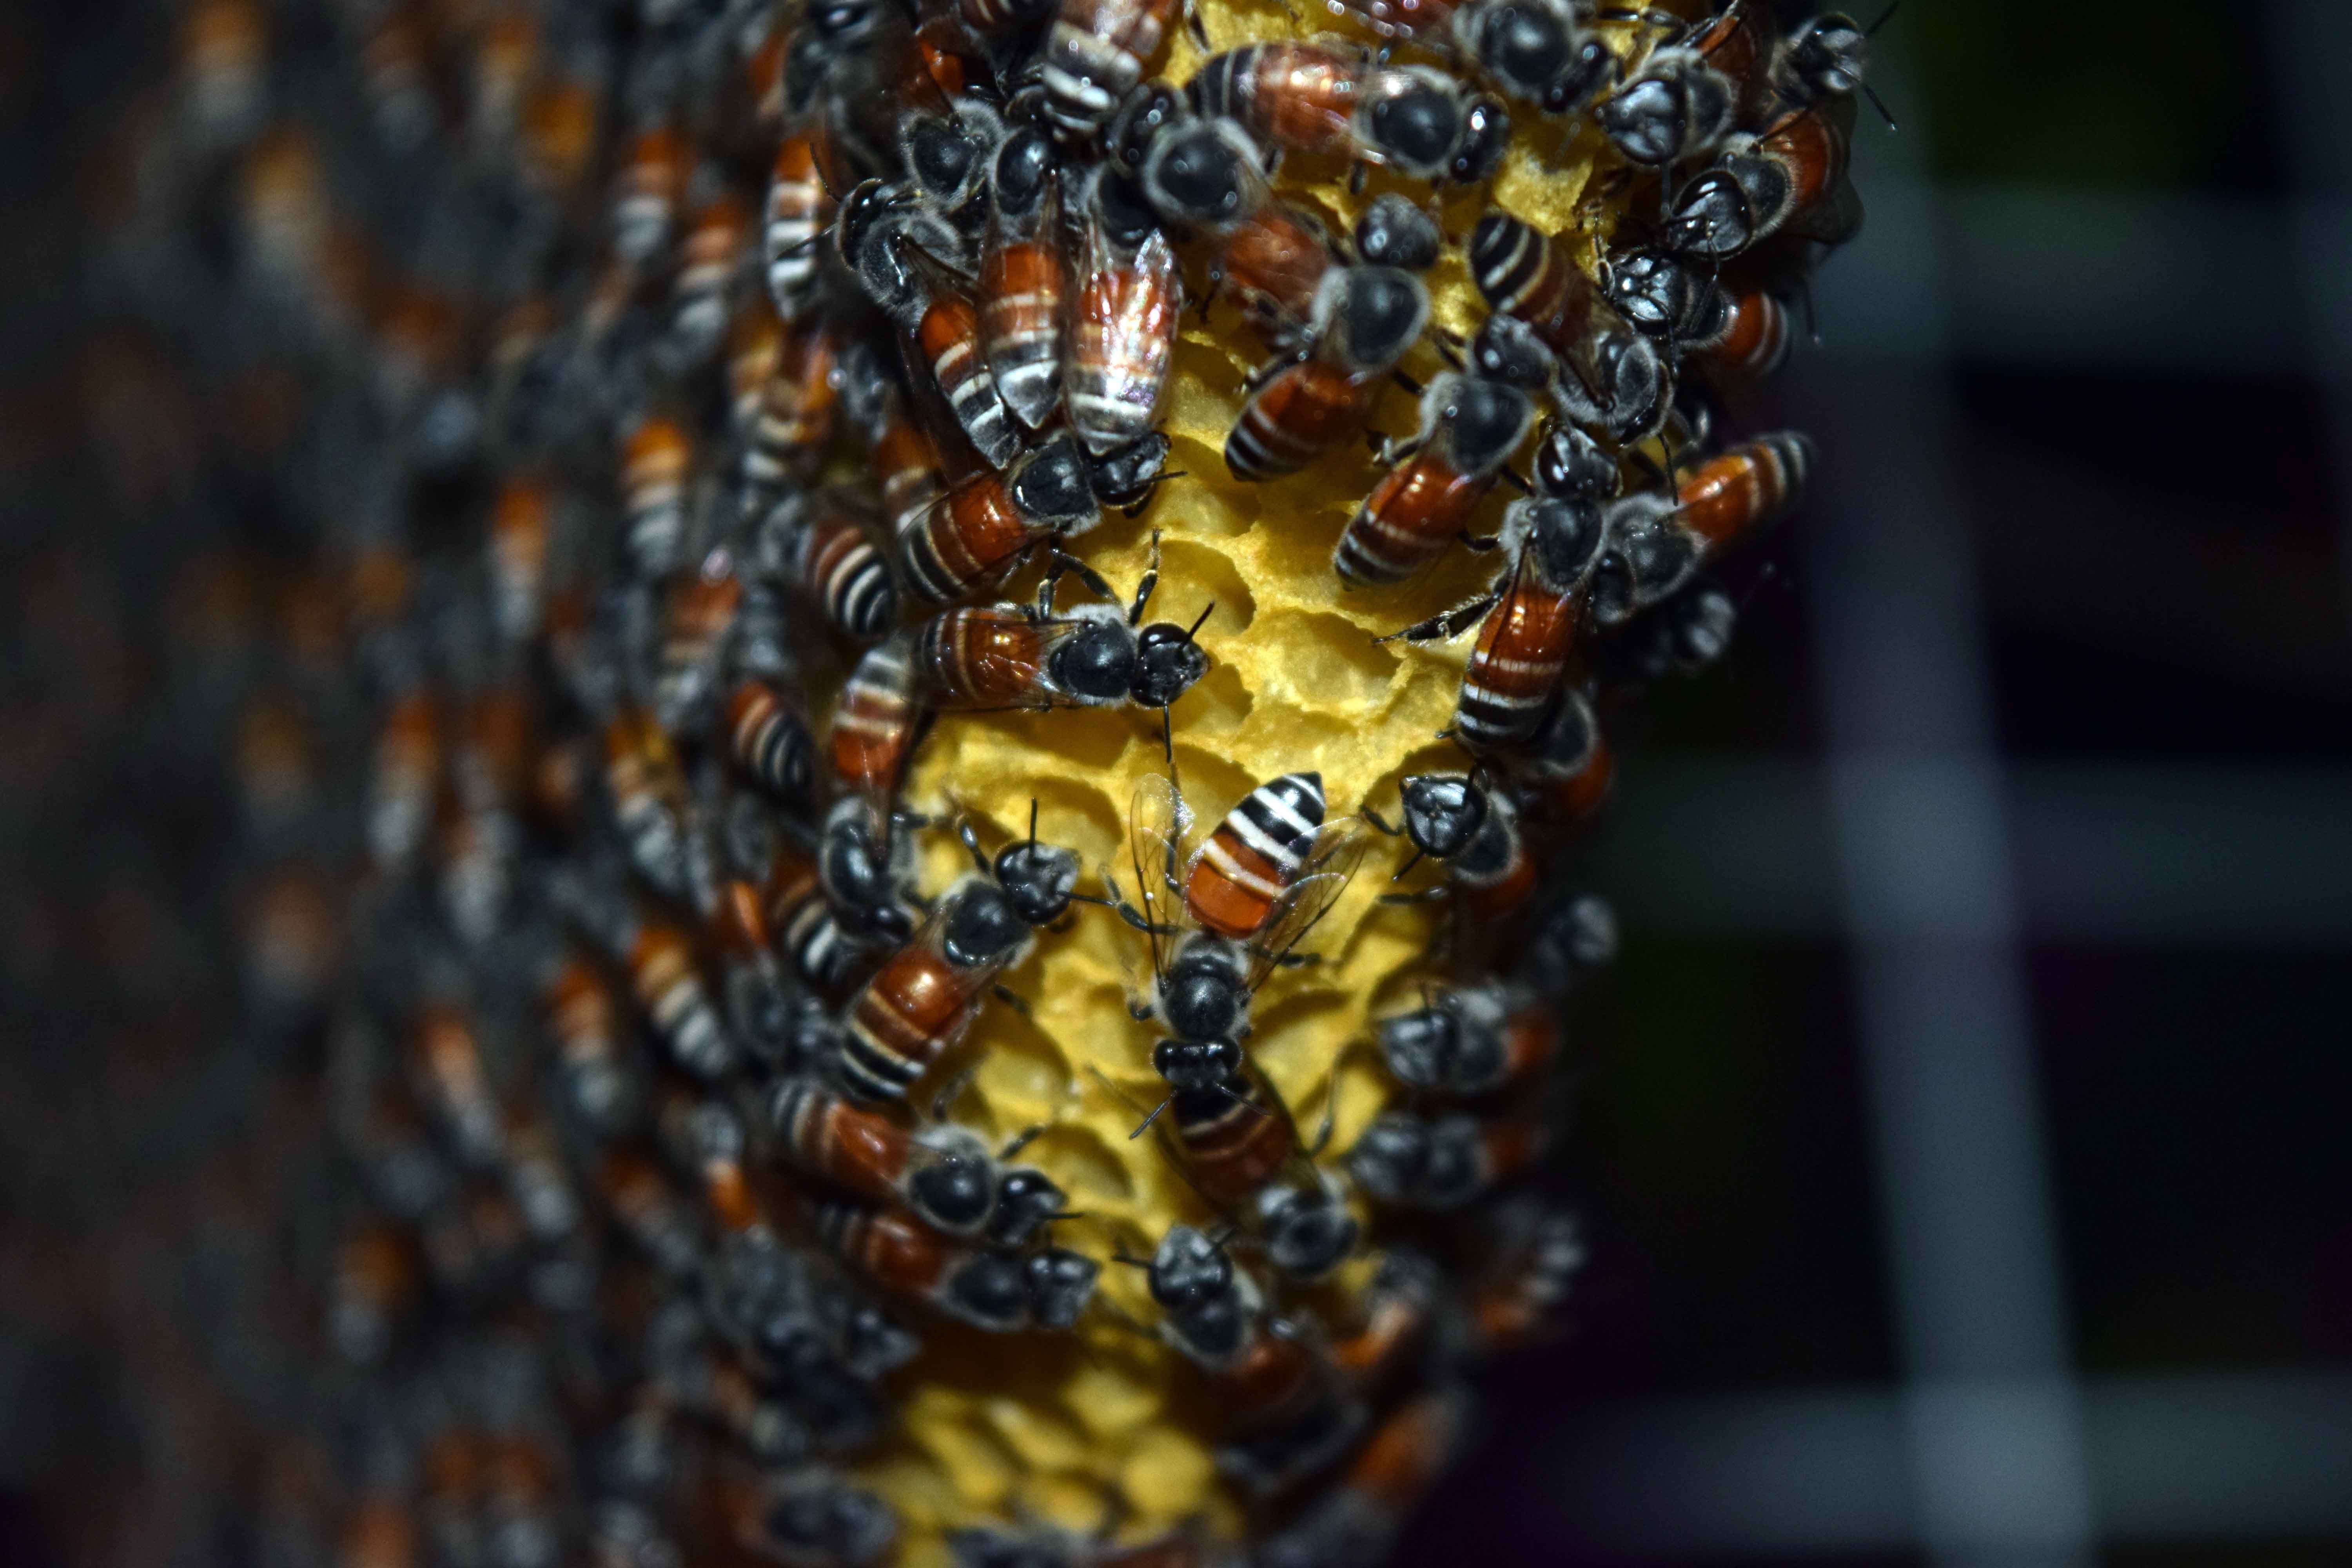 colony of bee, bees, honeycomb, close-up, insect, beehive, nature